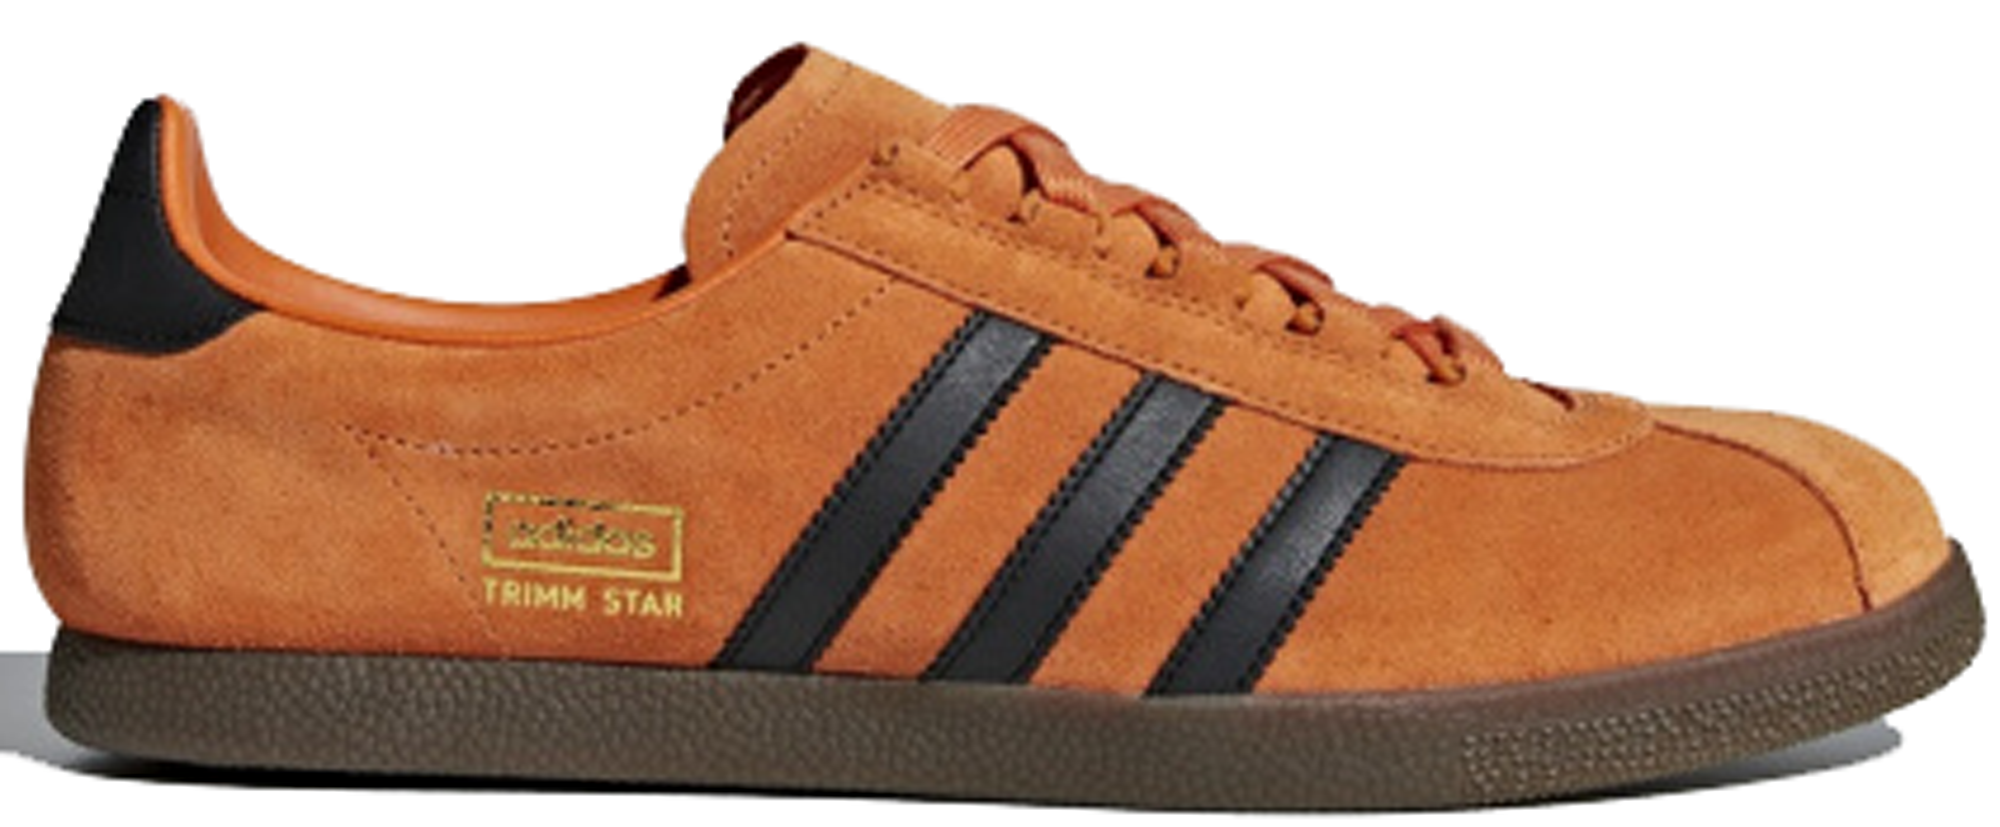 adidas trimm star for sale